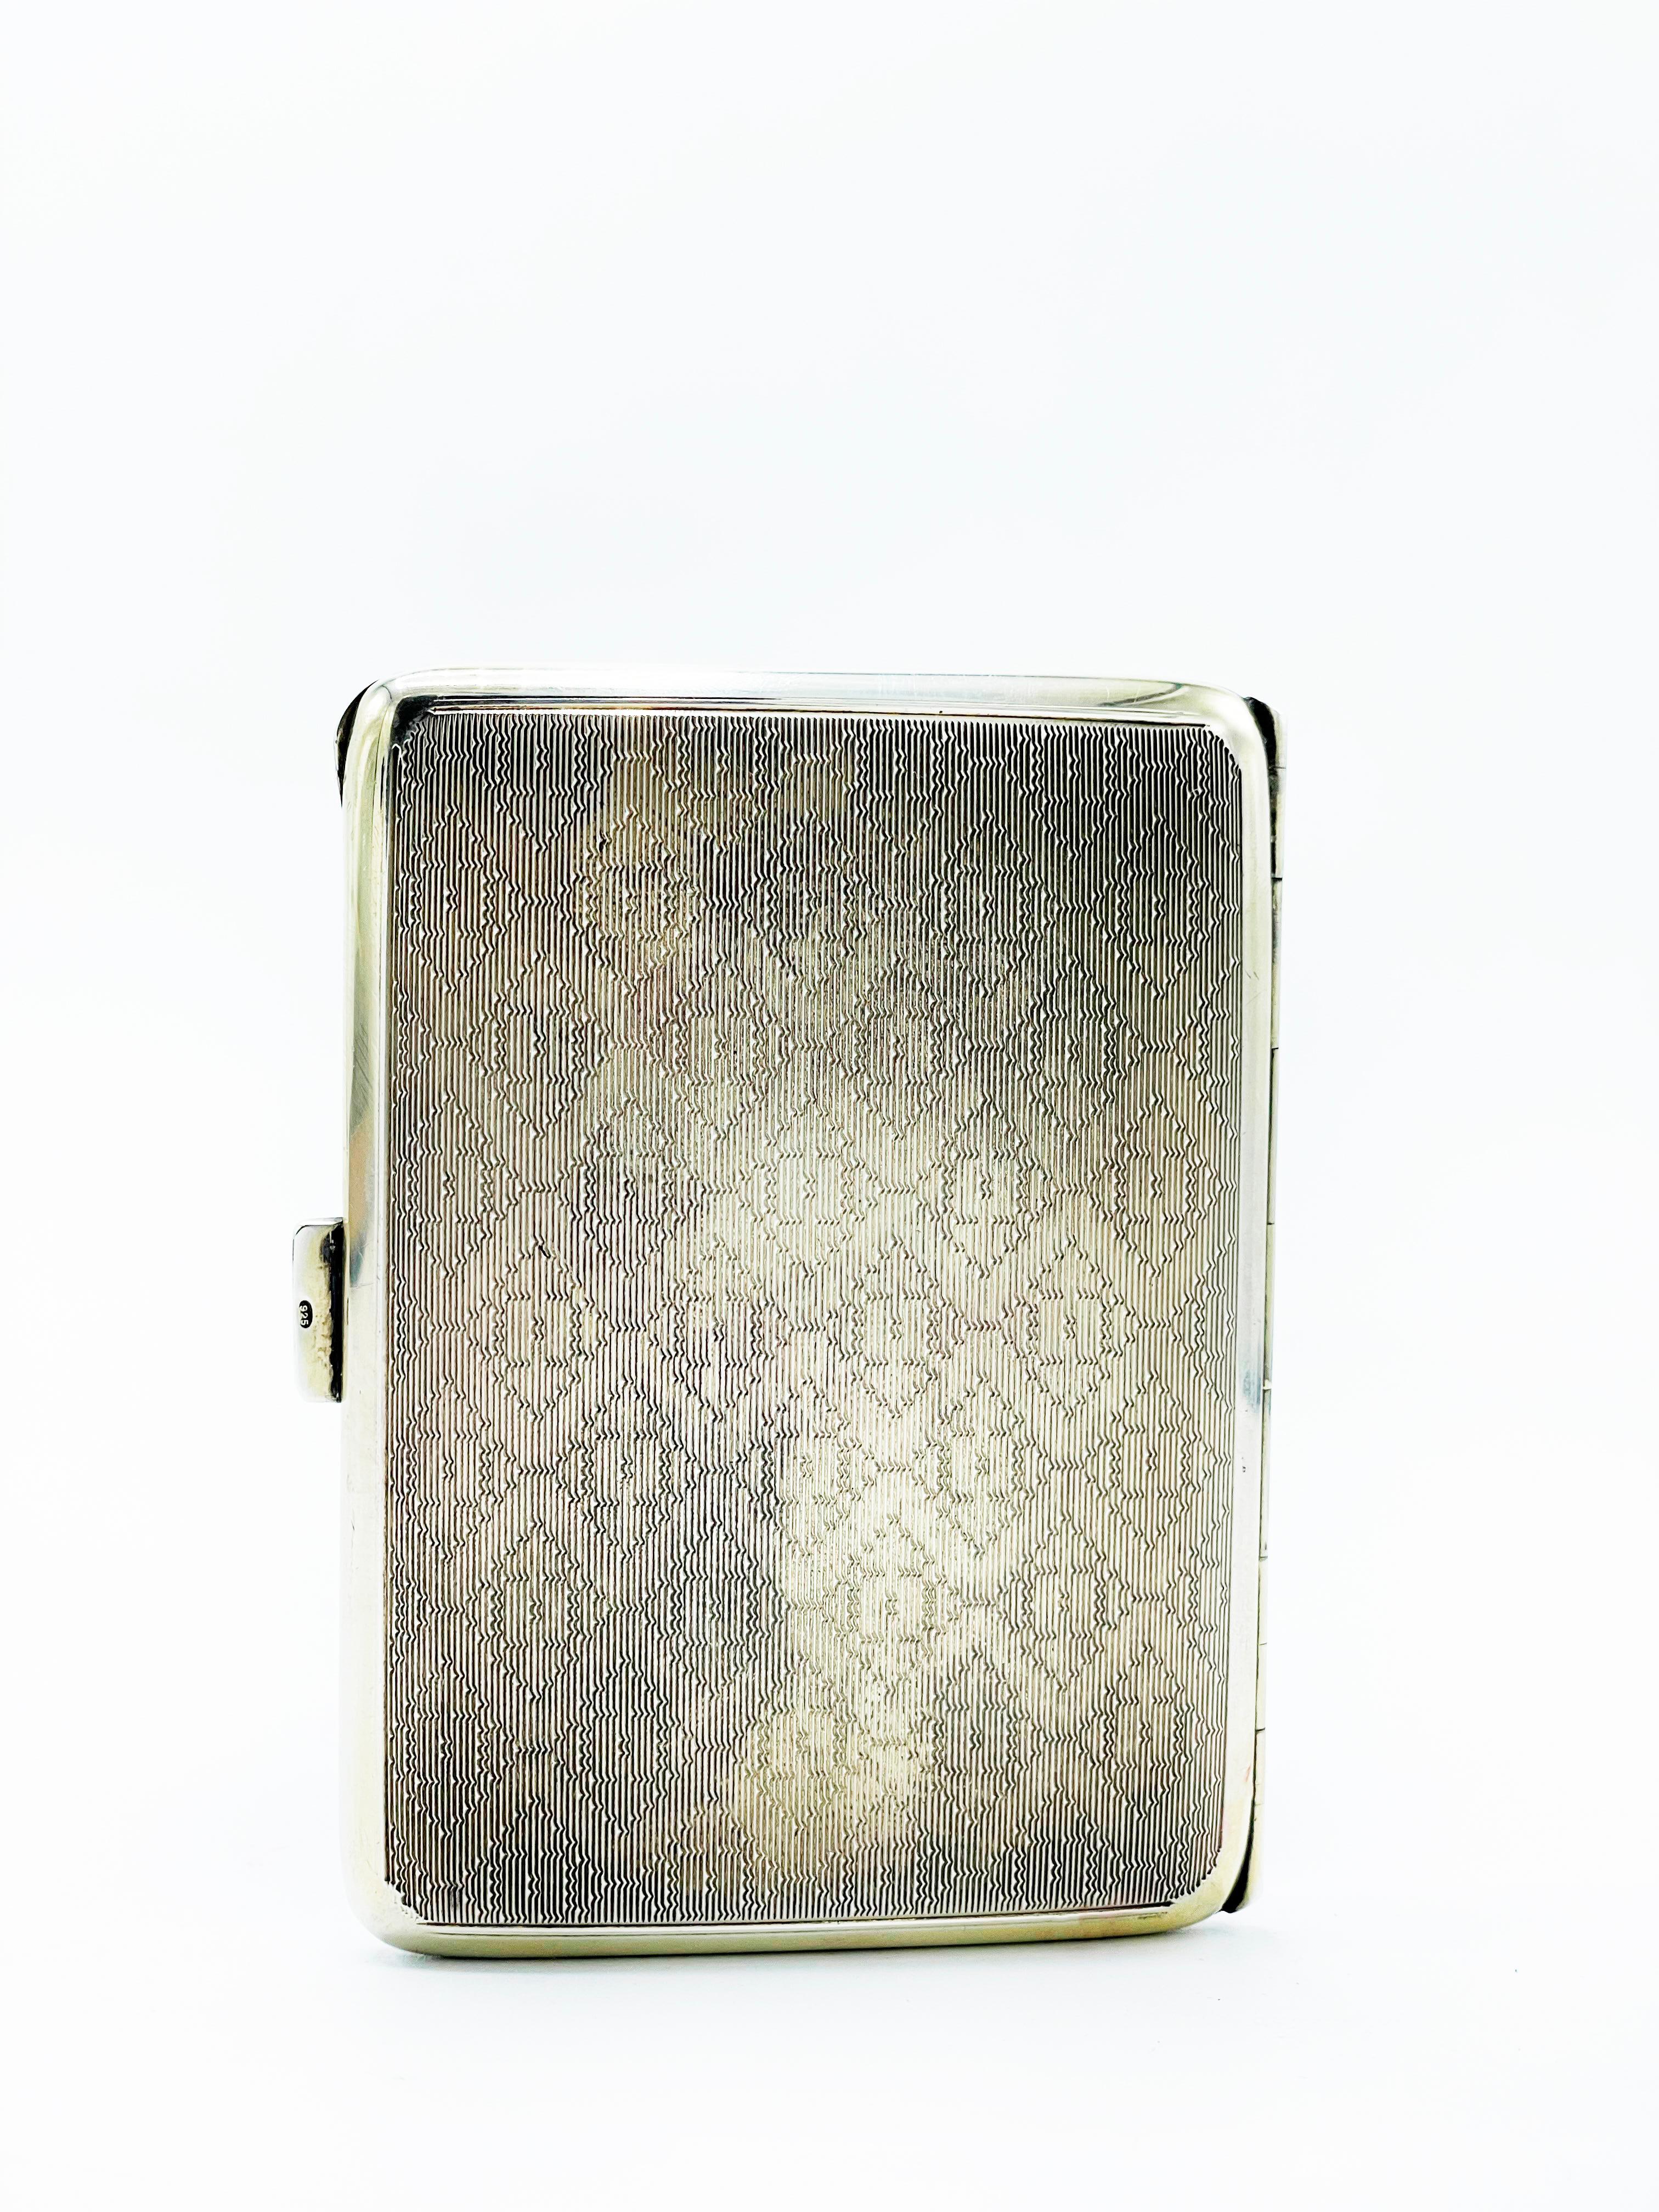 Dunhill London 1928, Enameled Cigarette case 925 Sterling Silver
It has a beautiful and authentic enameled Vanity Fair on the lid with a delicate red enamel border at the edges.
a collection design originating from the years 1920-1929, Art Deco